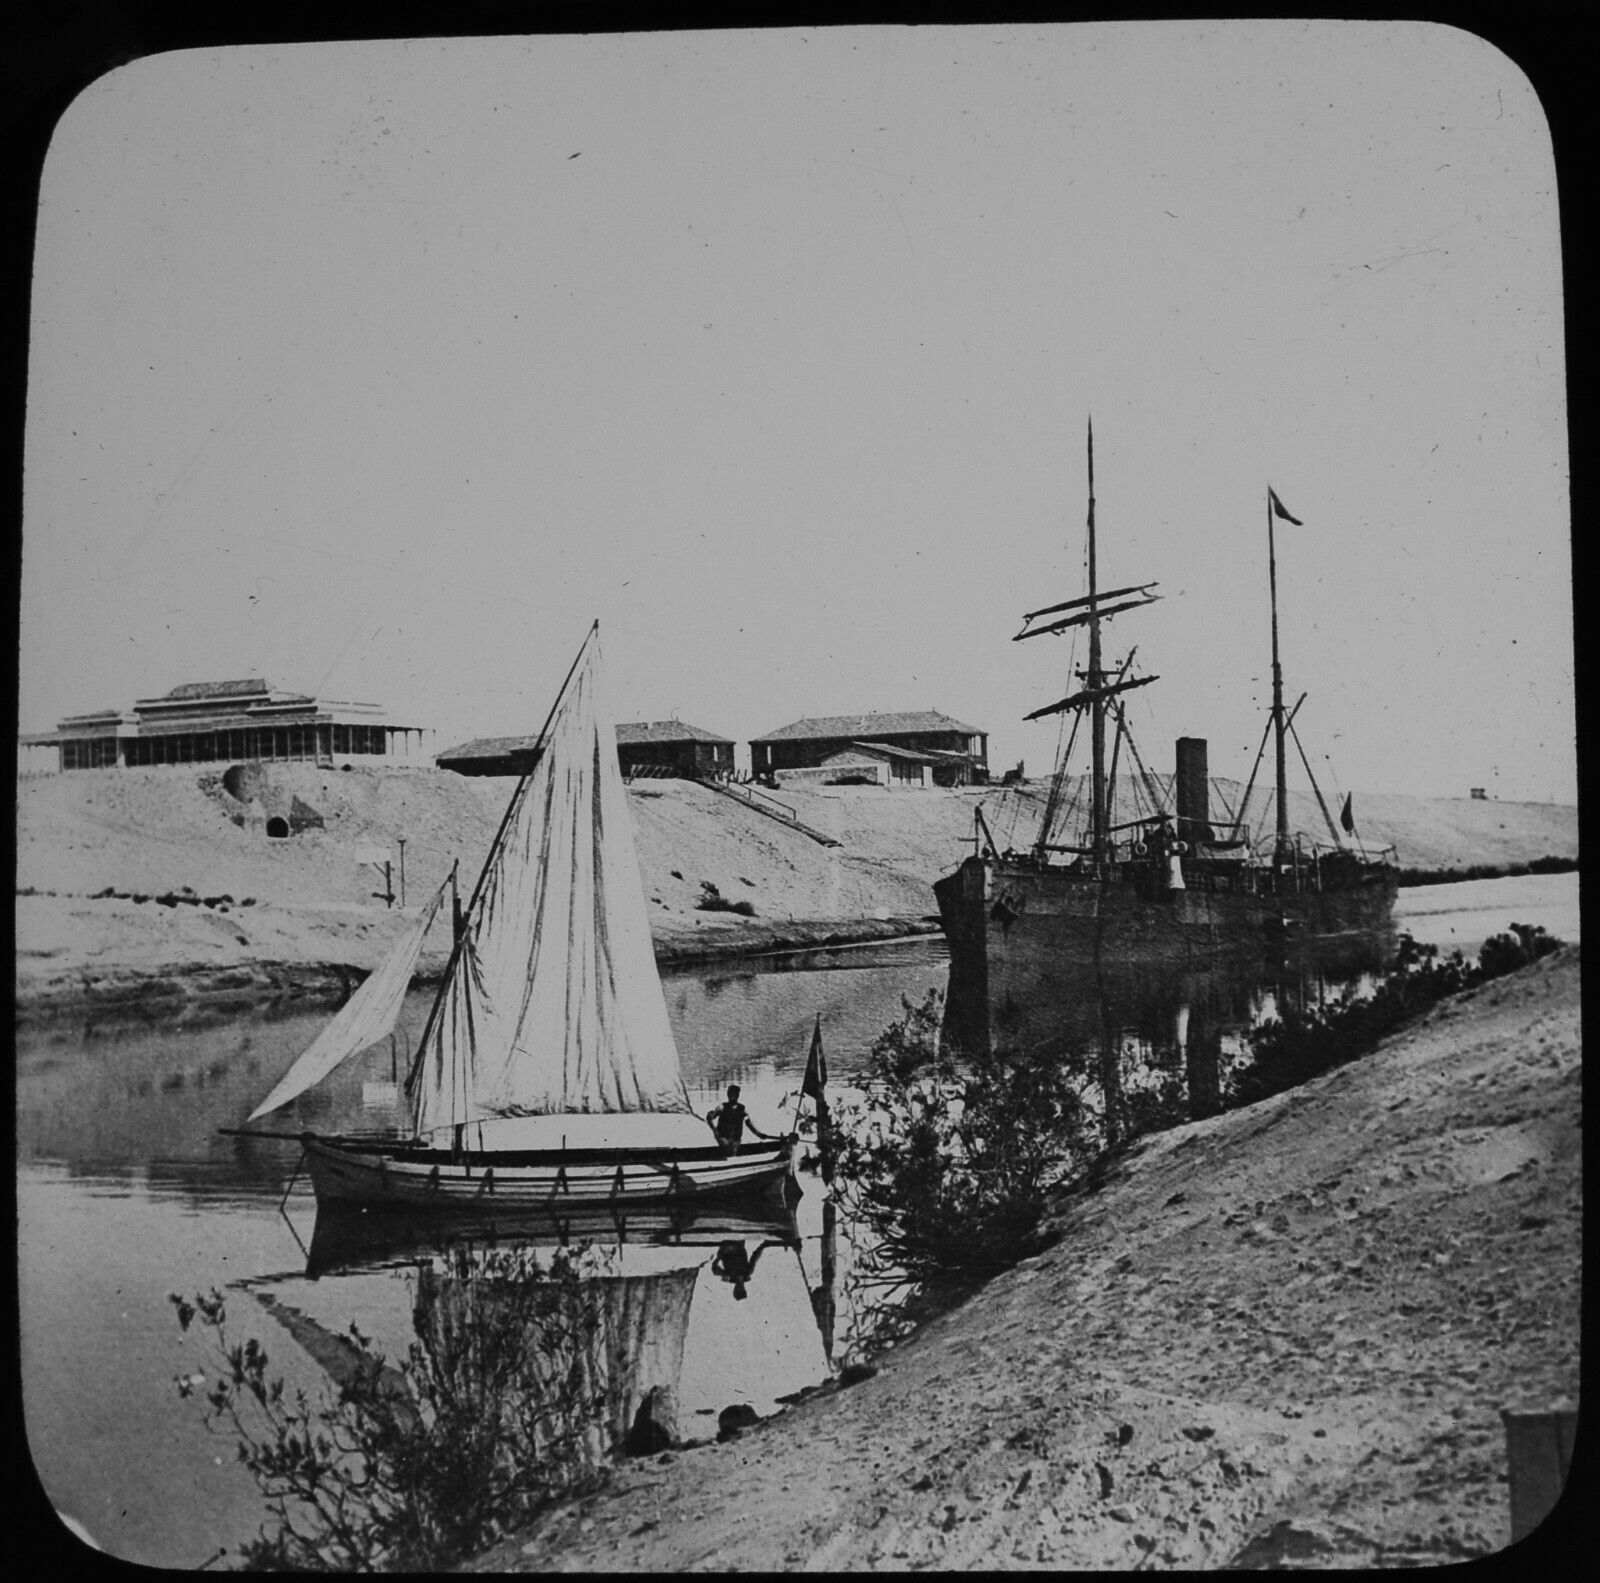 STEAMER SHIP IN THE SUEZ CANAL 1903 OLD PHOTOGRAPH Magic Lantern Slide EGYPT